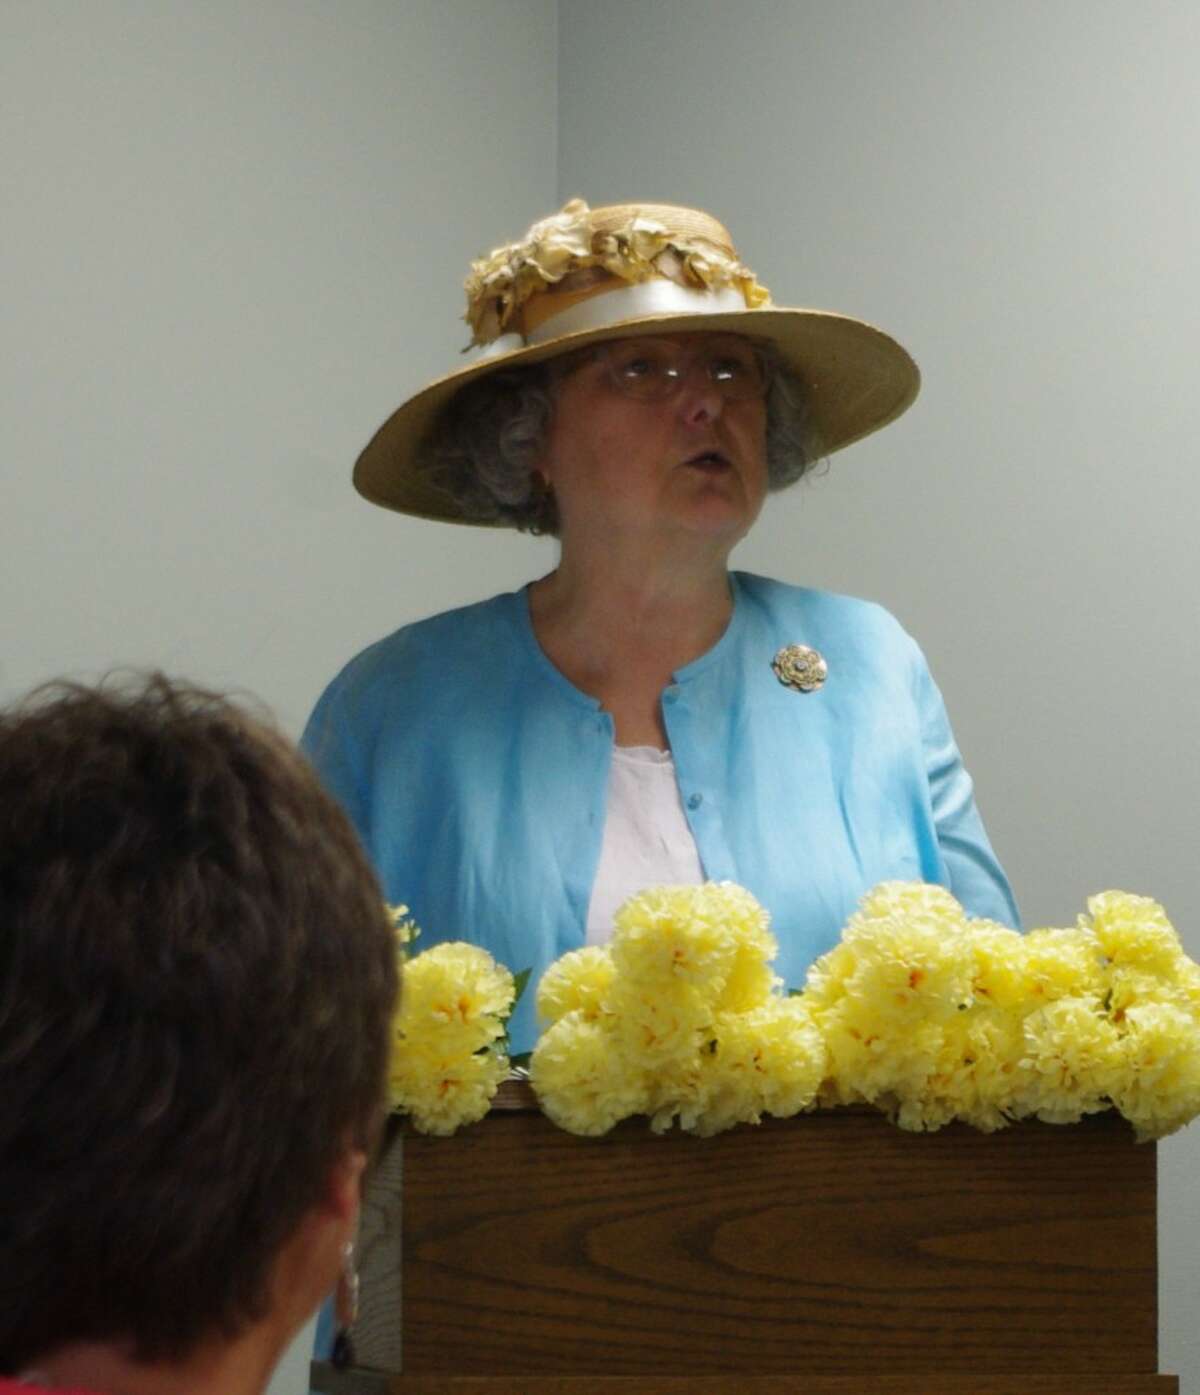 Ruth Cooper, a member of the Lakeside Club, presented a program on the history of the club, which goes back to 1885, at its meeting Thursday at the First Baptist Church in Manistee. (Dave Yarnell/News Advocate)